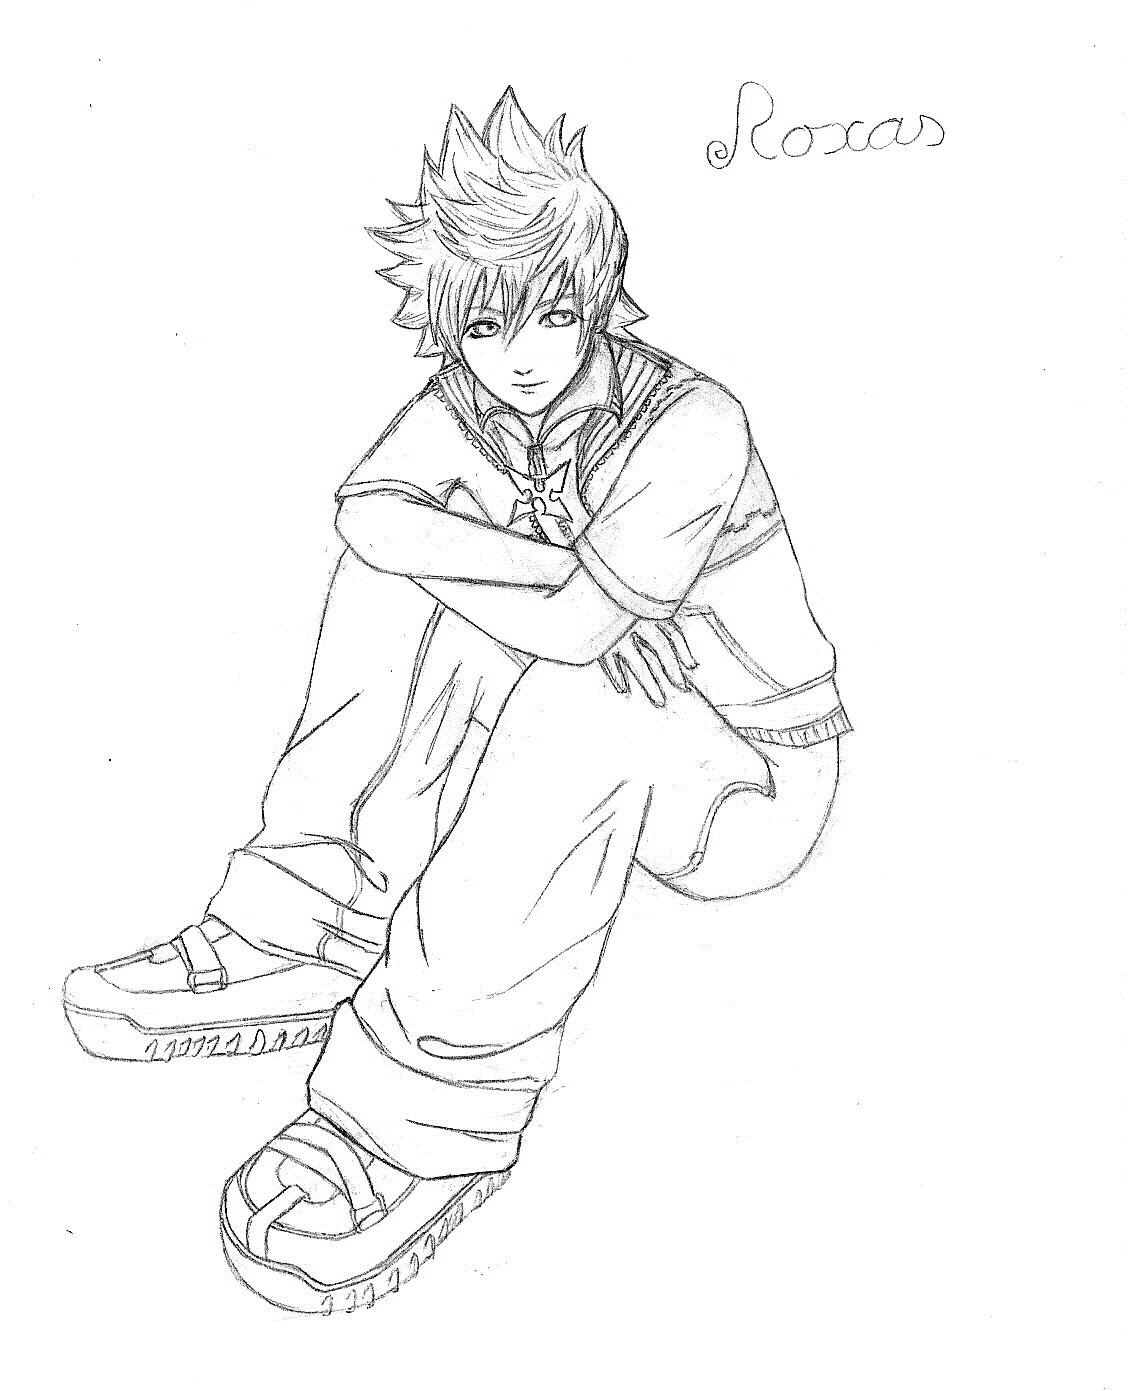 Roxas (not cleaned) by Zhao_Yun